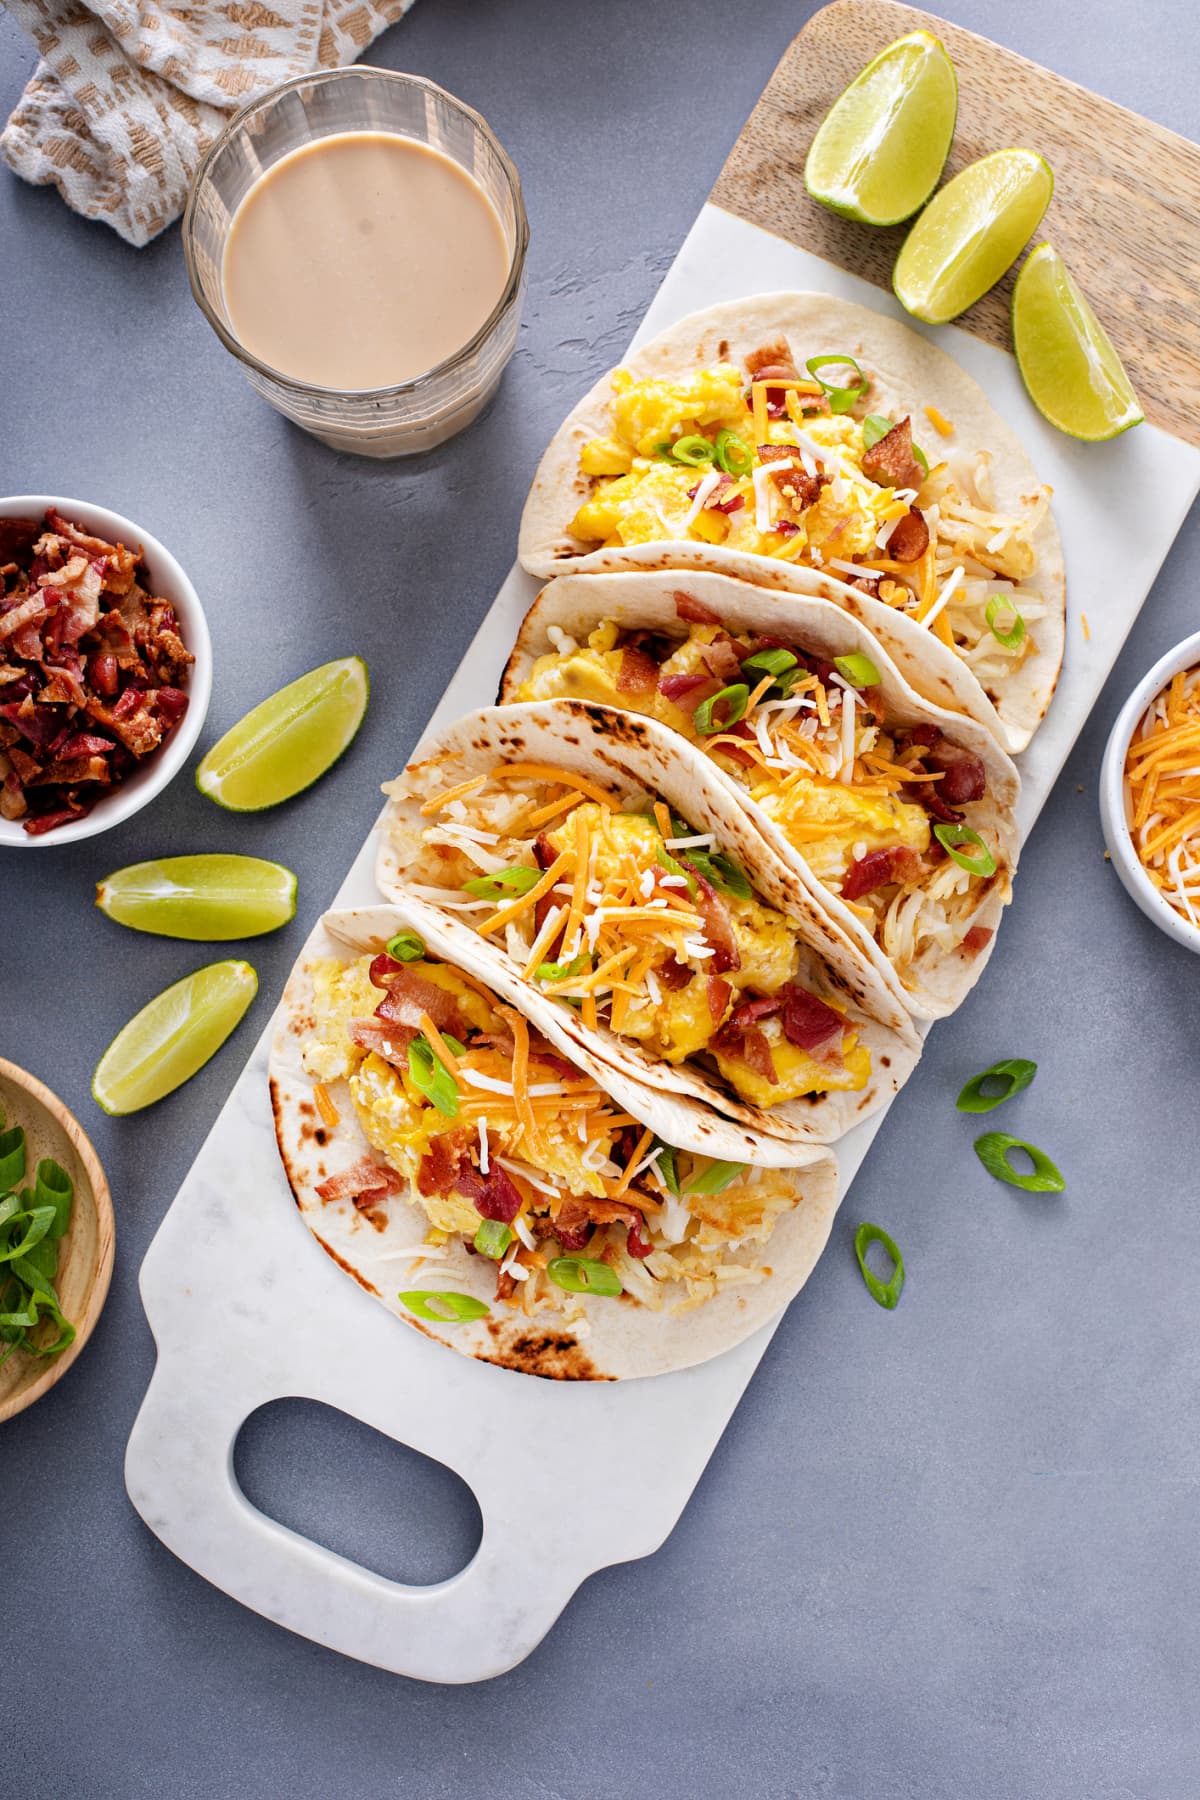 Breakfast tacos with hashbrowns, eggs, and bacon